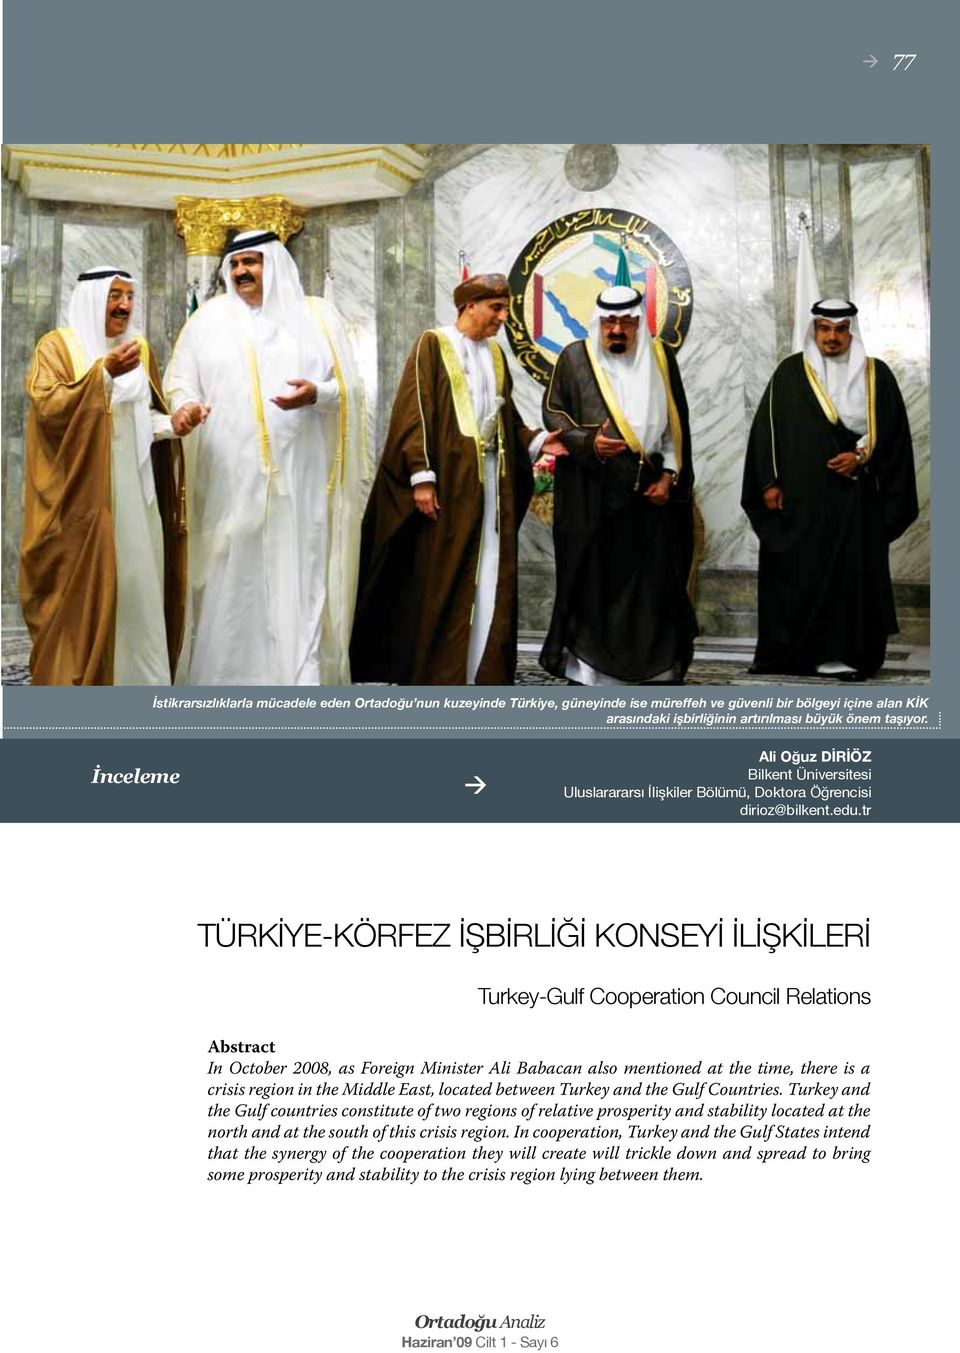 tr TÜRKİYE-KÖRFEZ İŞBİRLİĞİ KONSEYİ İLİŞKİLERİ Turkey-Gulf Cooperation Council Relations Abstract In October 2008, as Foreign Minister Ali Babacan also mentioned at the time, there is a crisis region